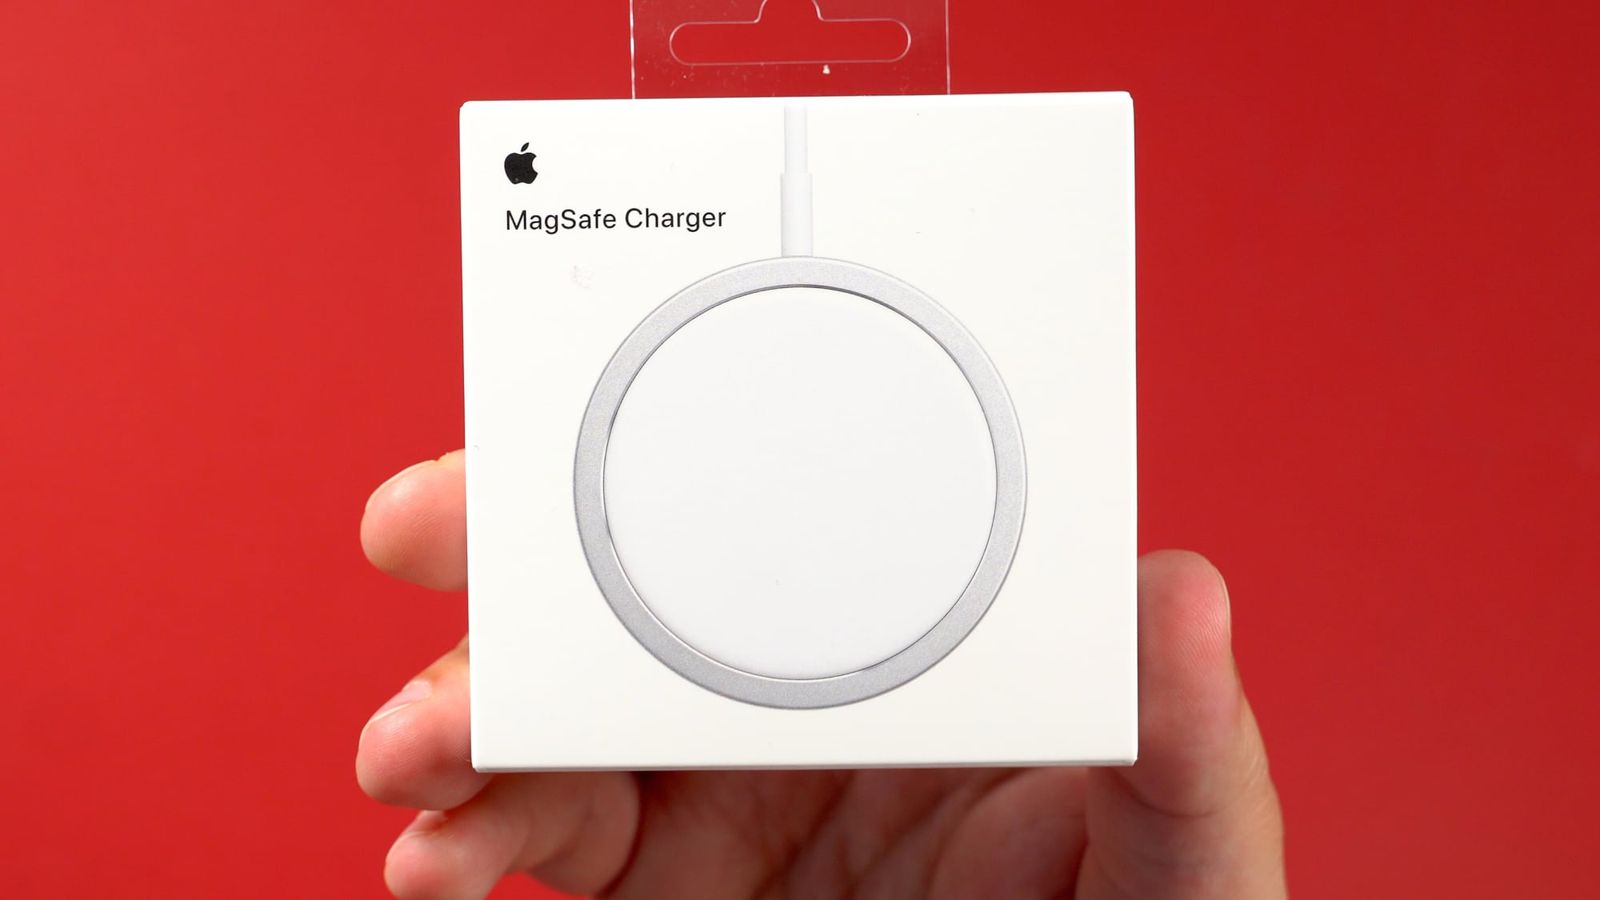 Hands-On With Apple's MagSafe Charger for iPhone 12 - MacRumors